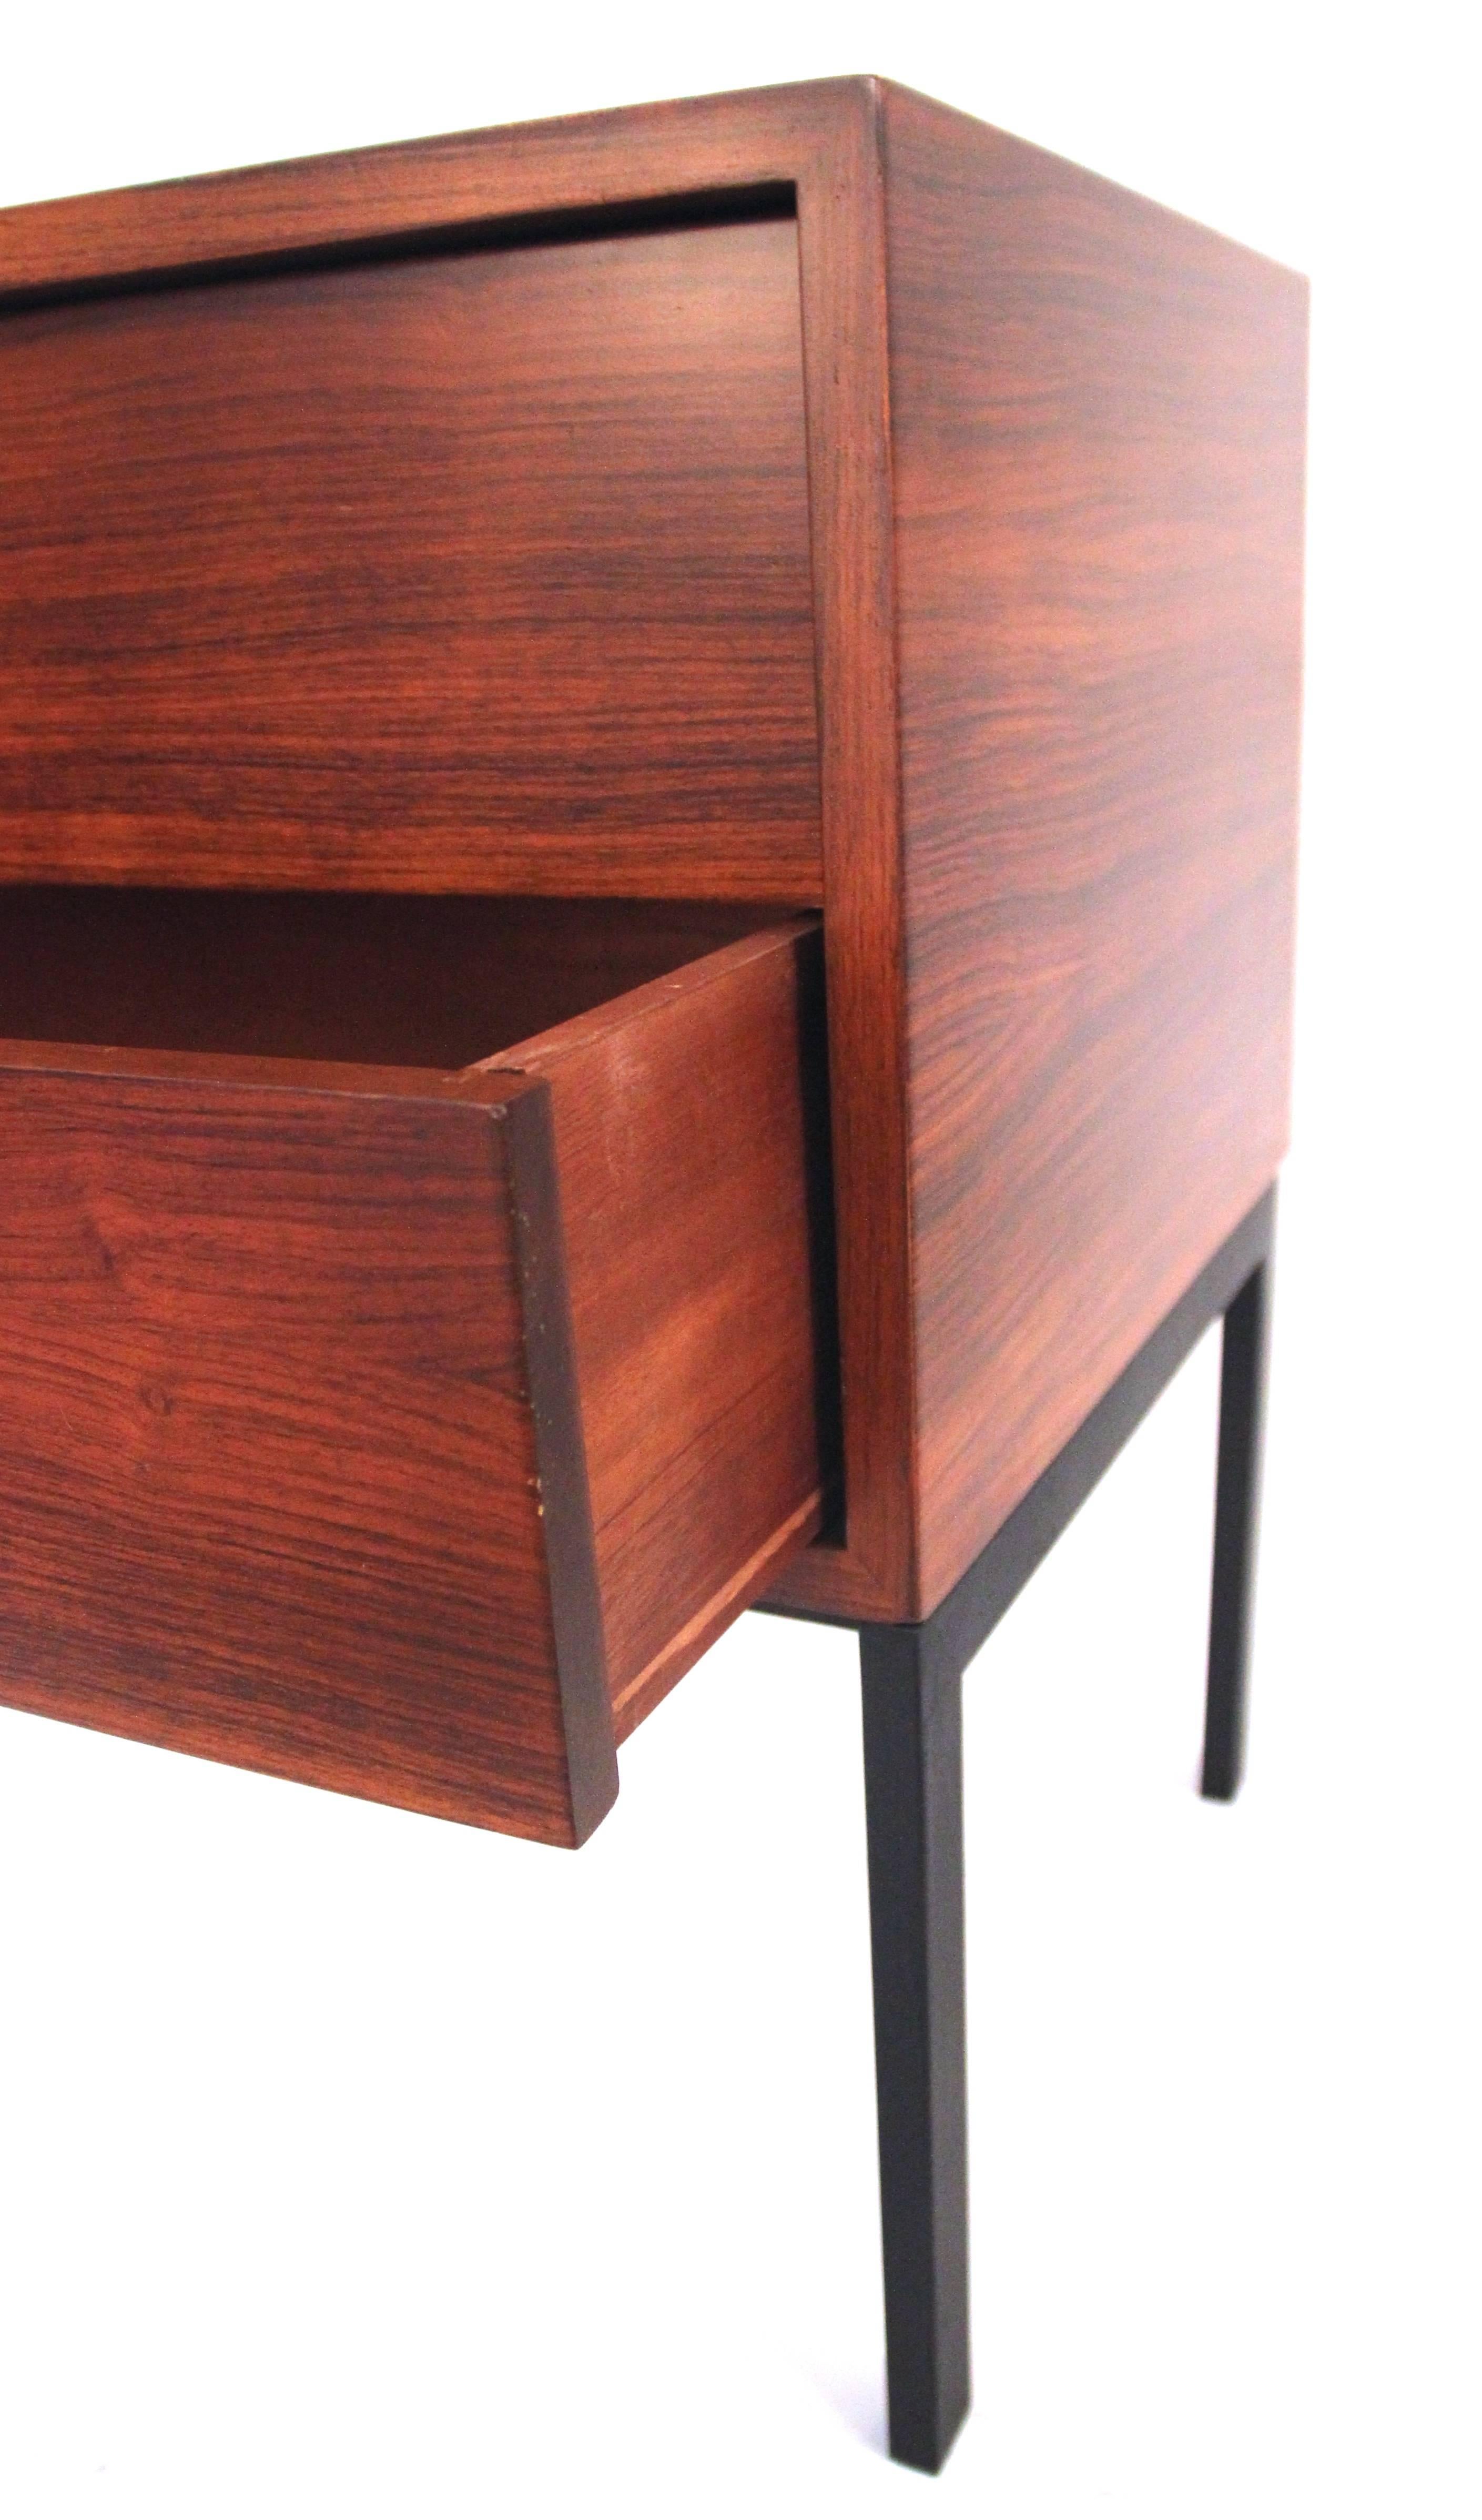 French Antoine Philippon and Jacqueline Lecoq, Large Sideboard, Rosewood, circa 1965